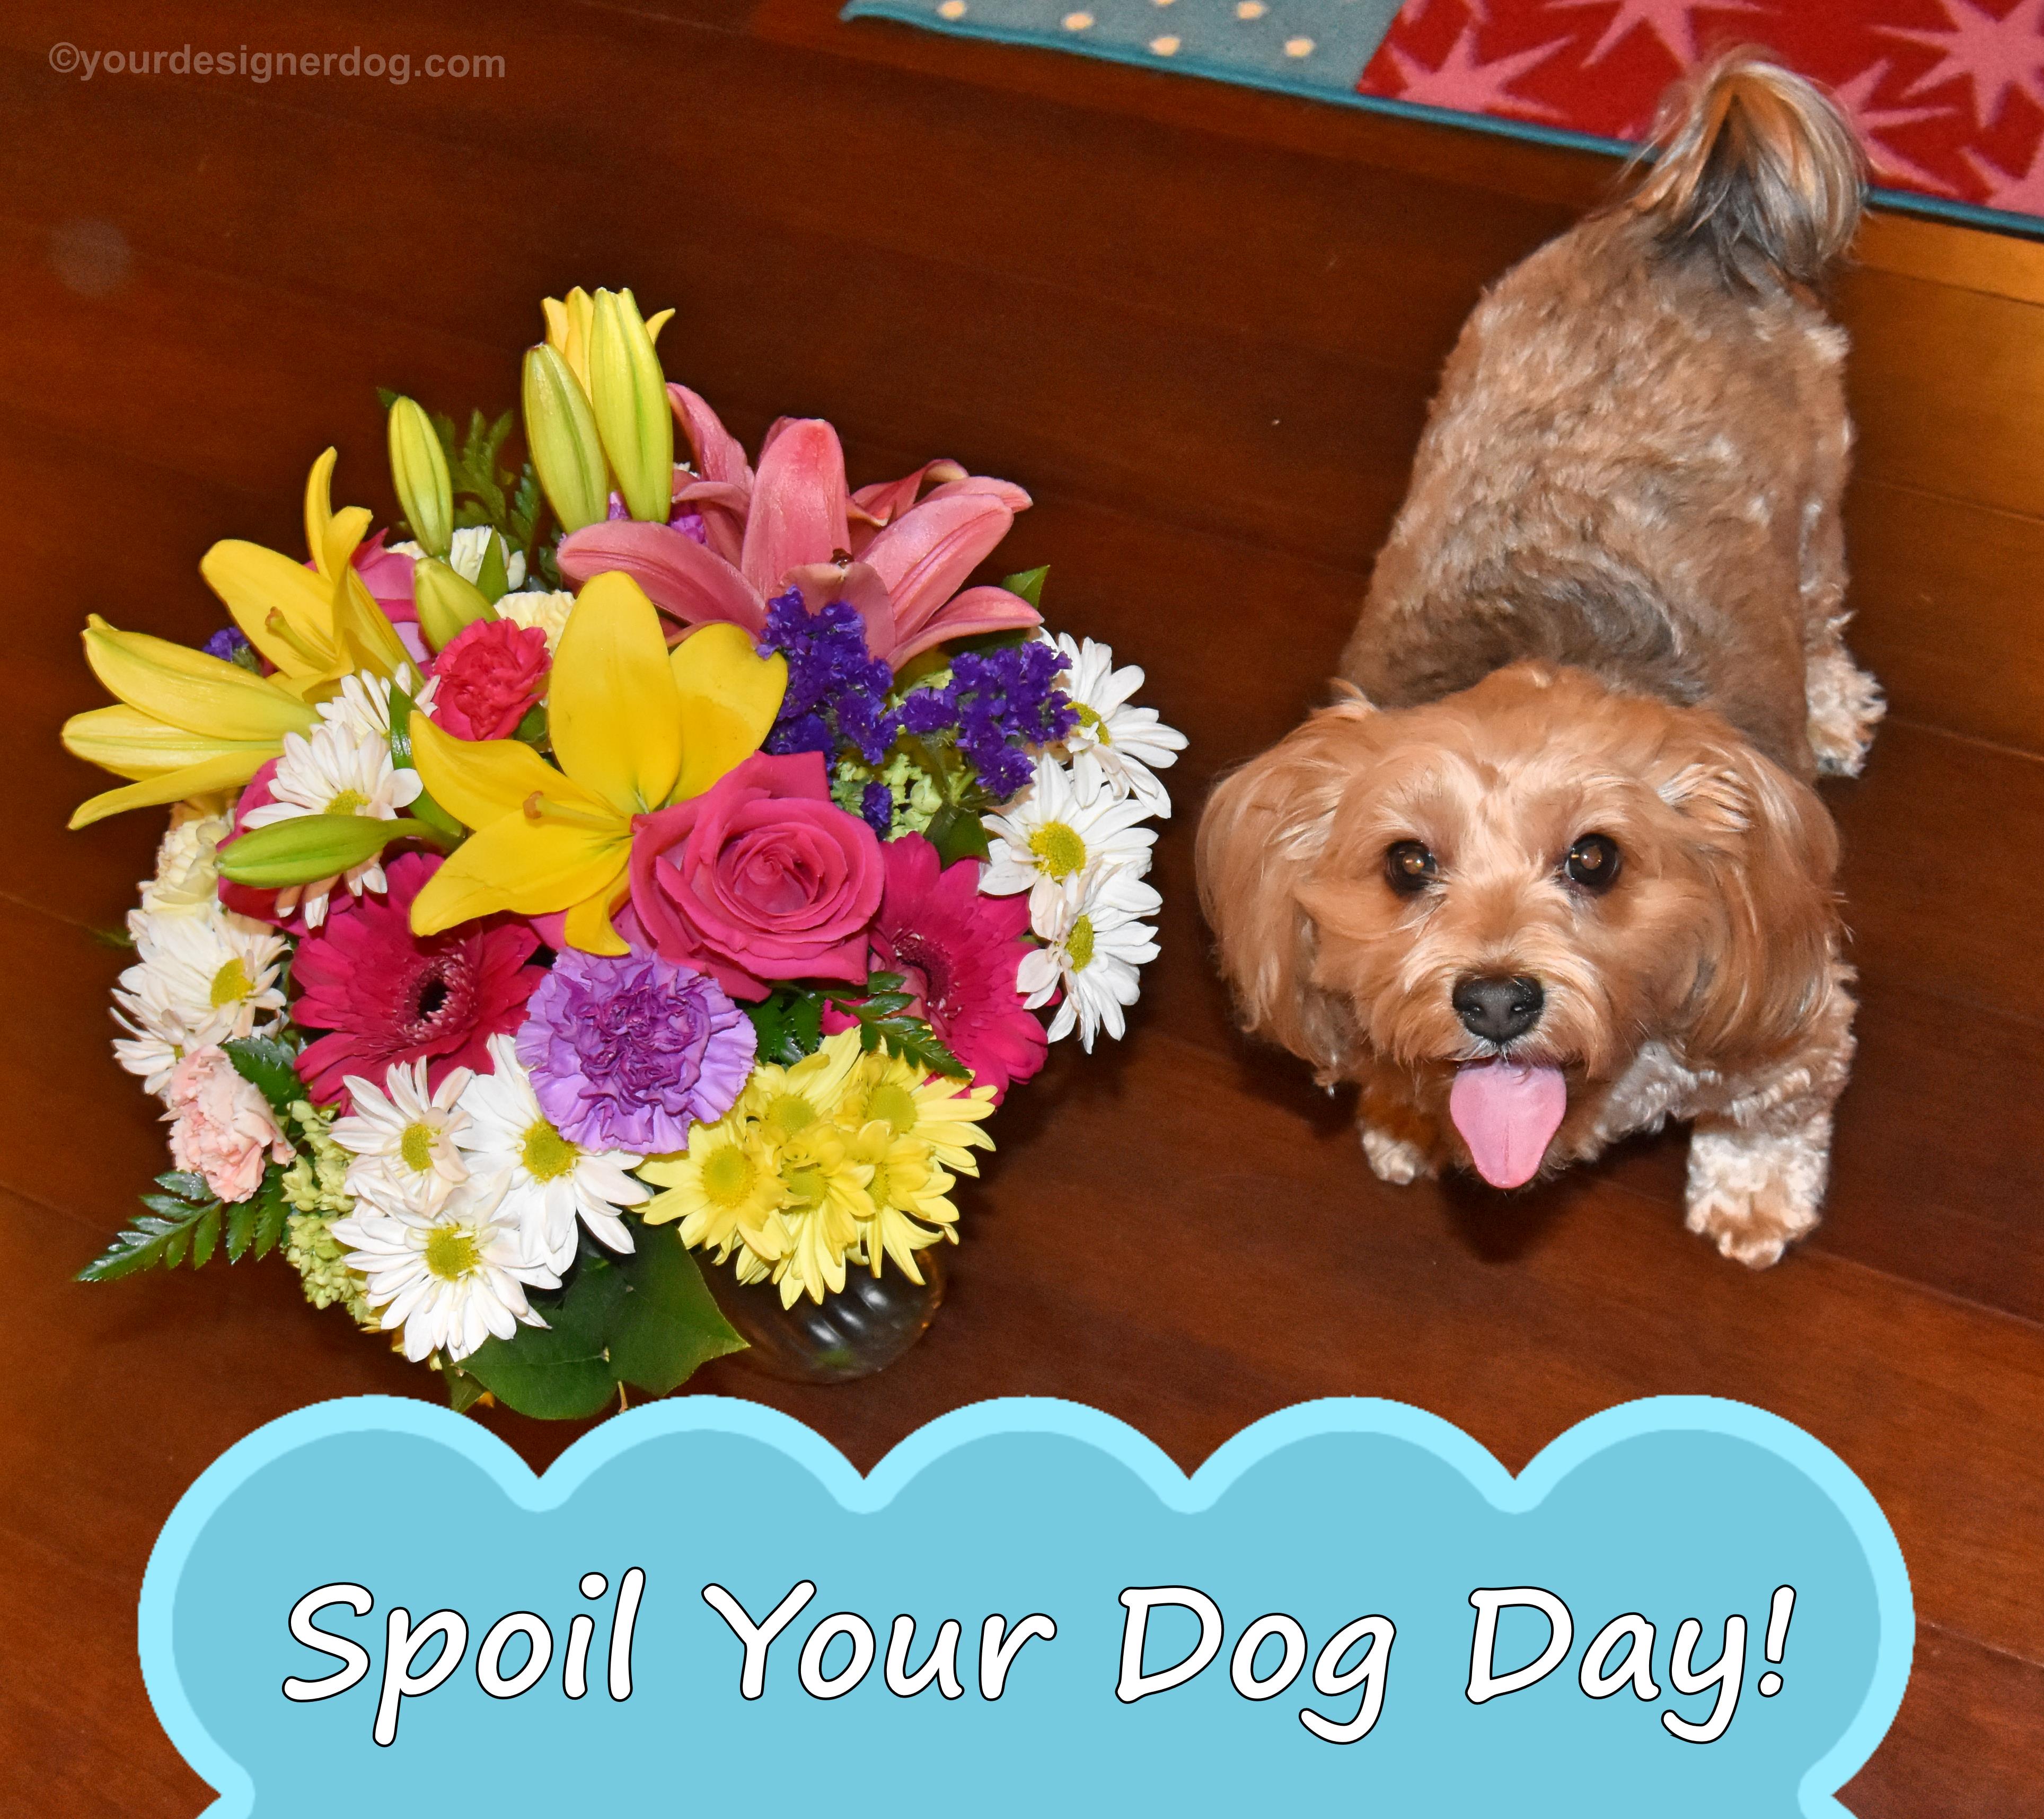 dogs, designer dogs, yorkipoo, yorkie poo, spoil your dog day, flower bouquet